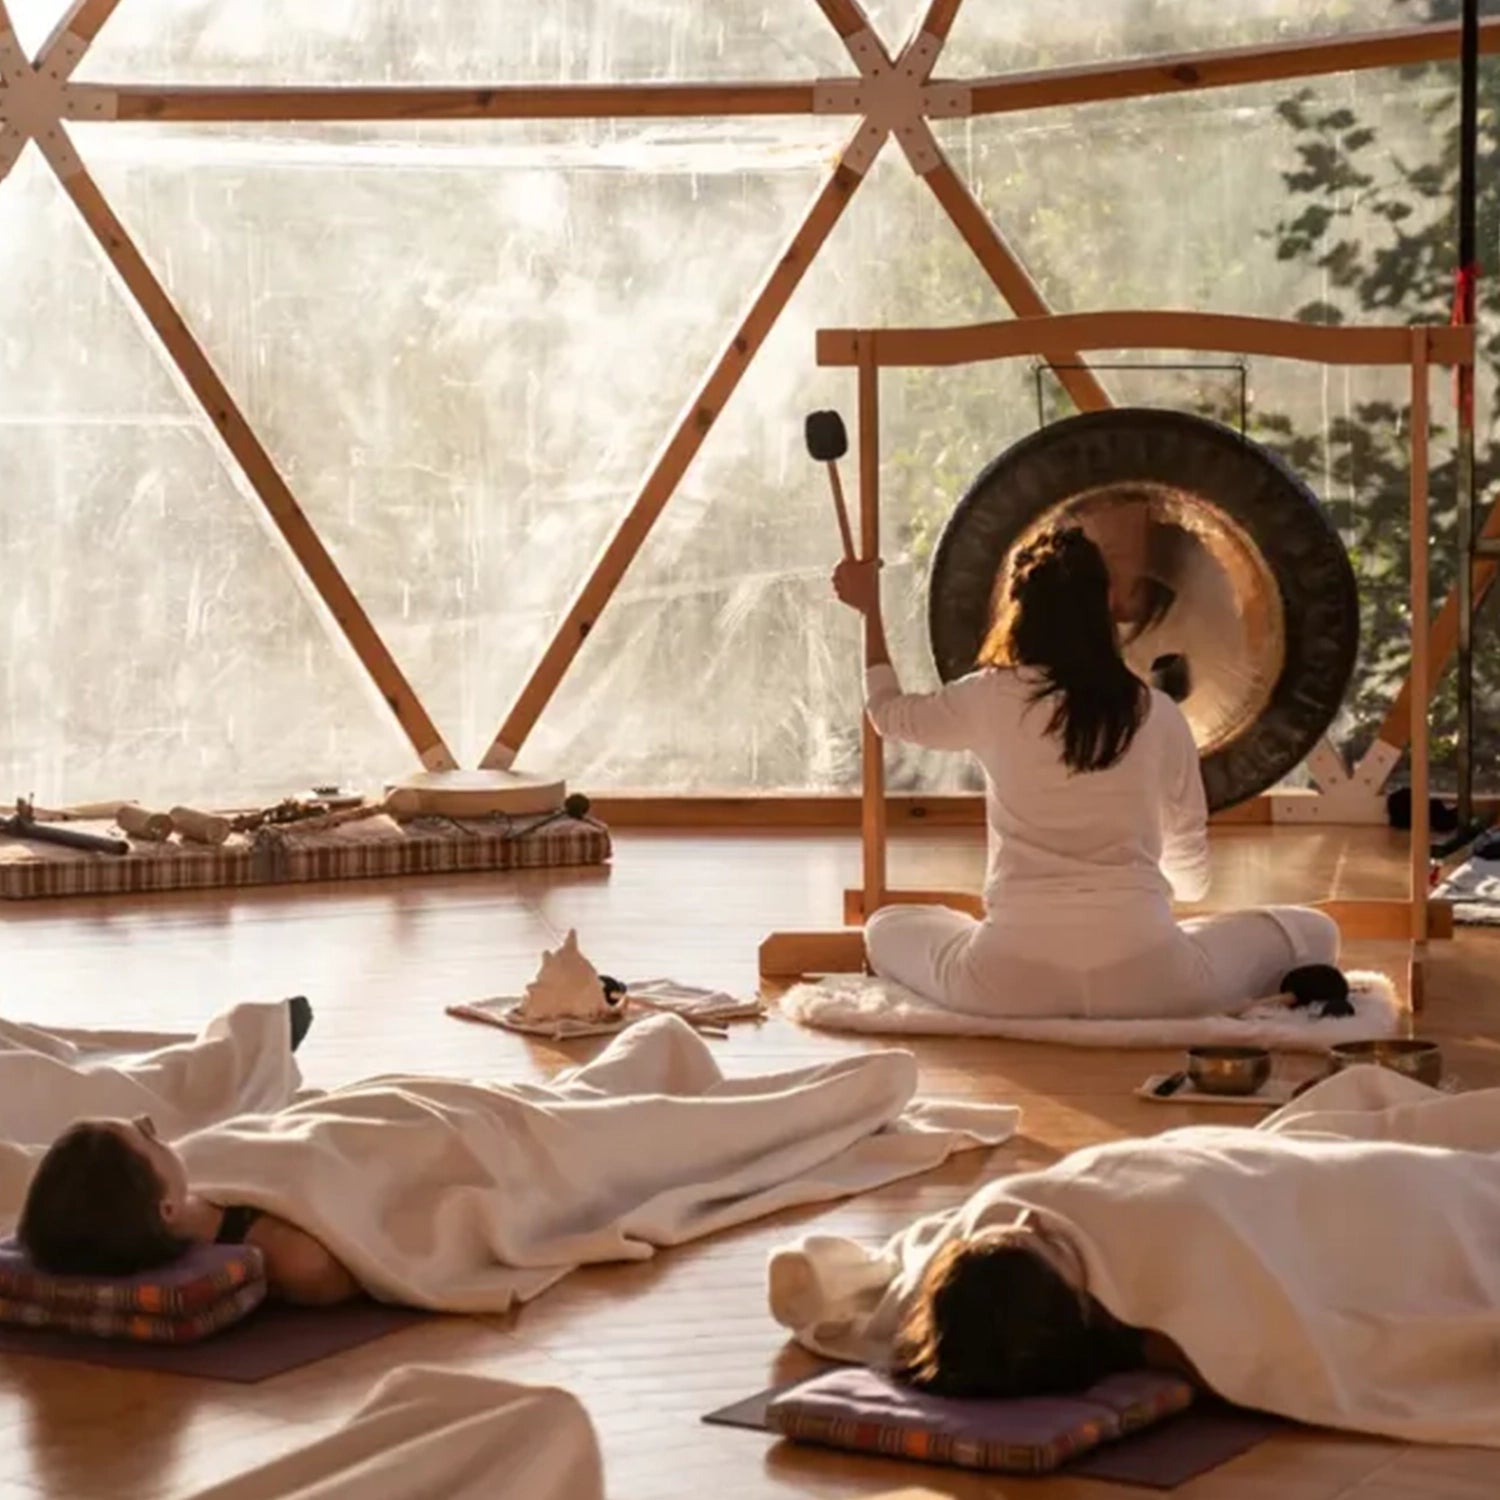 A Visionary Sound Bath session with participants lying down and an instructor playing a gong in a room with large windows and natural light, inspired by the serene vibes of Laguna Beach. Brand Name: THE FULLEST.